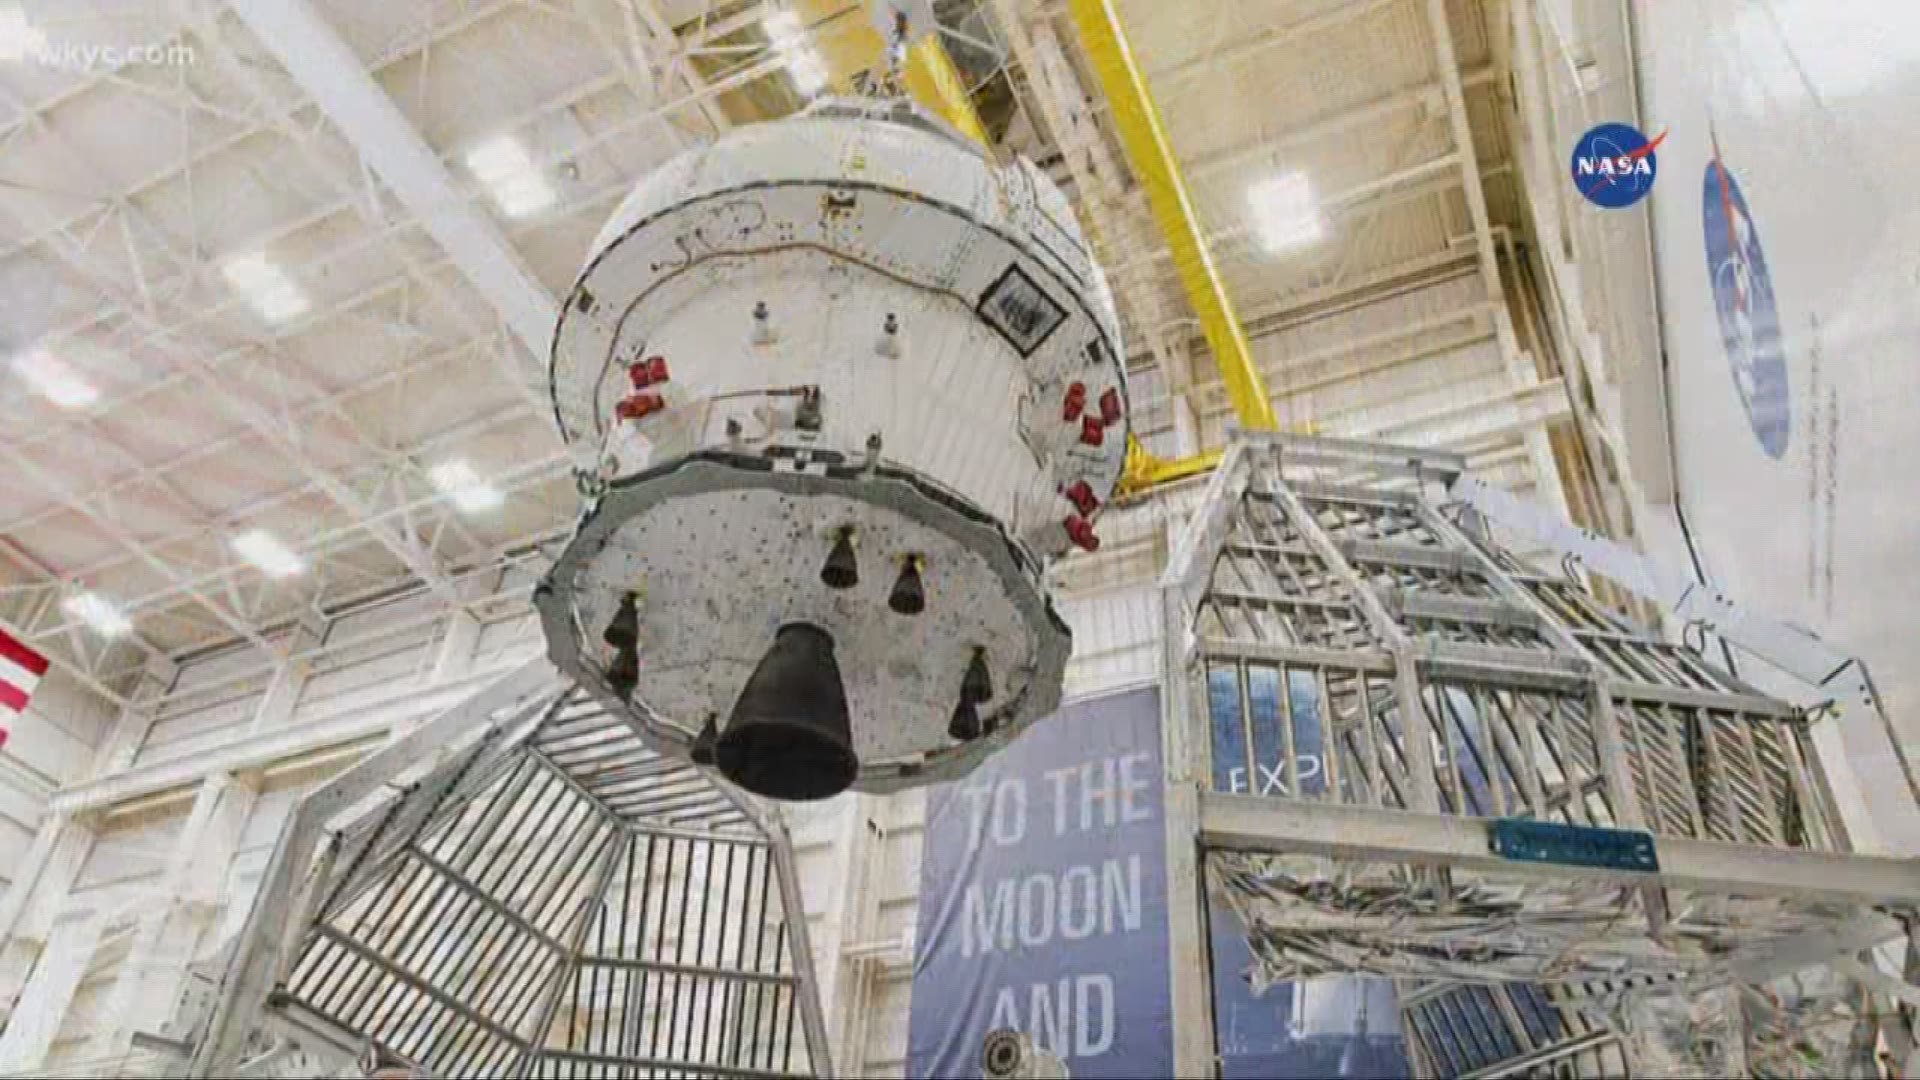 NASA reveals images of Orion space capsule without protective cover